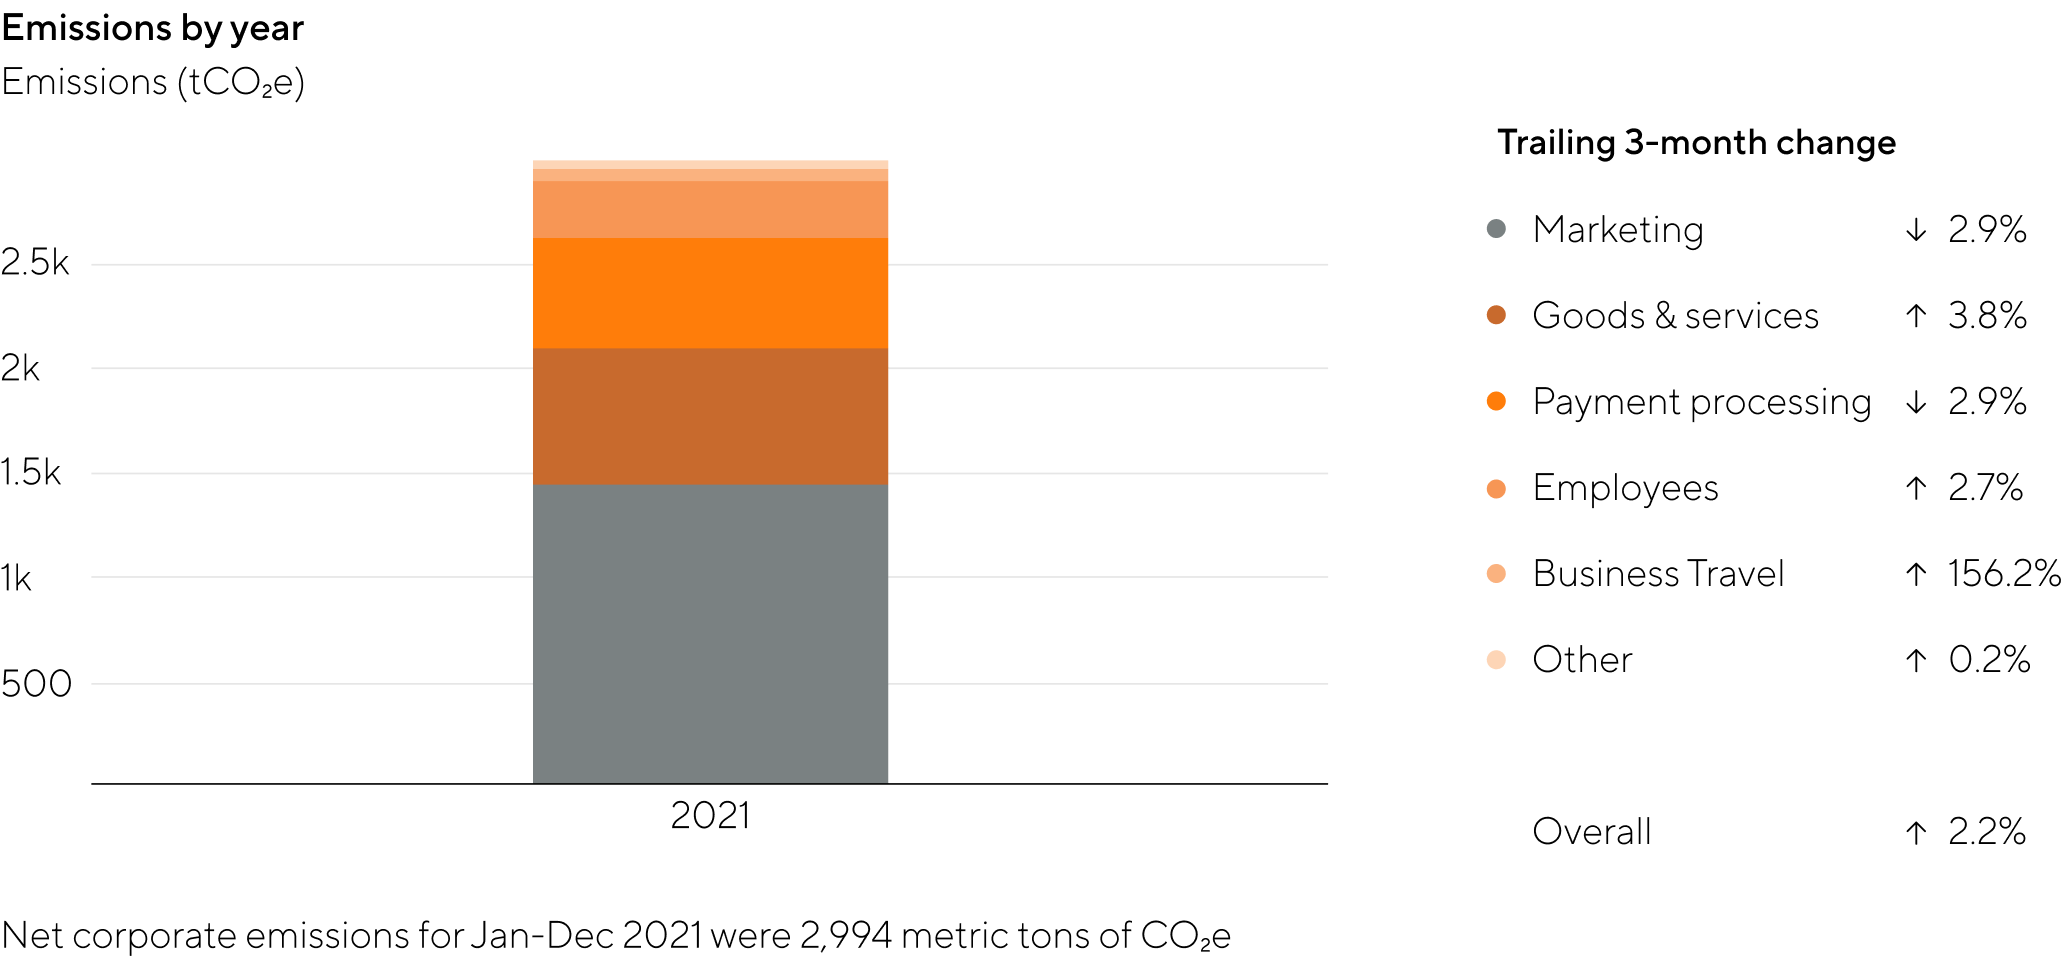 Carbon Footprint Graphics - 
Net corporate emissions for Jan-Dec 2021 were 2,994 metric tons of CO₂e